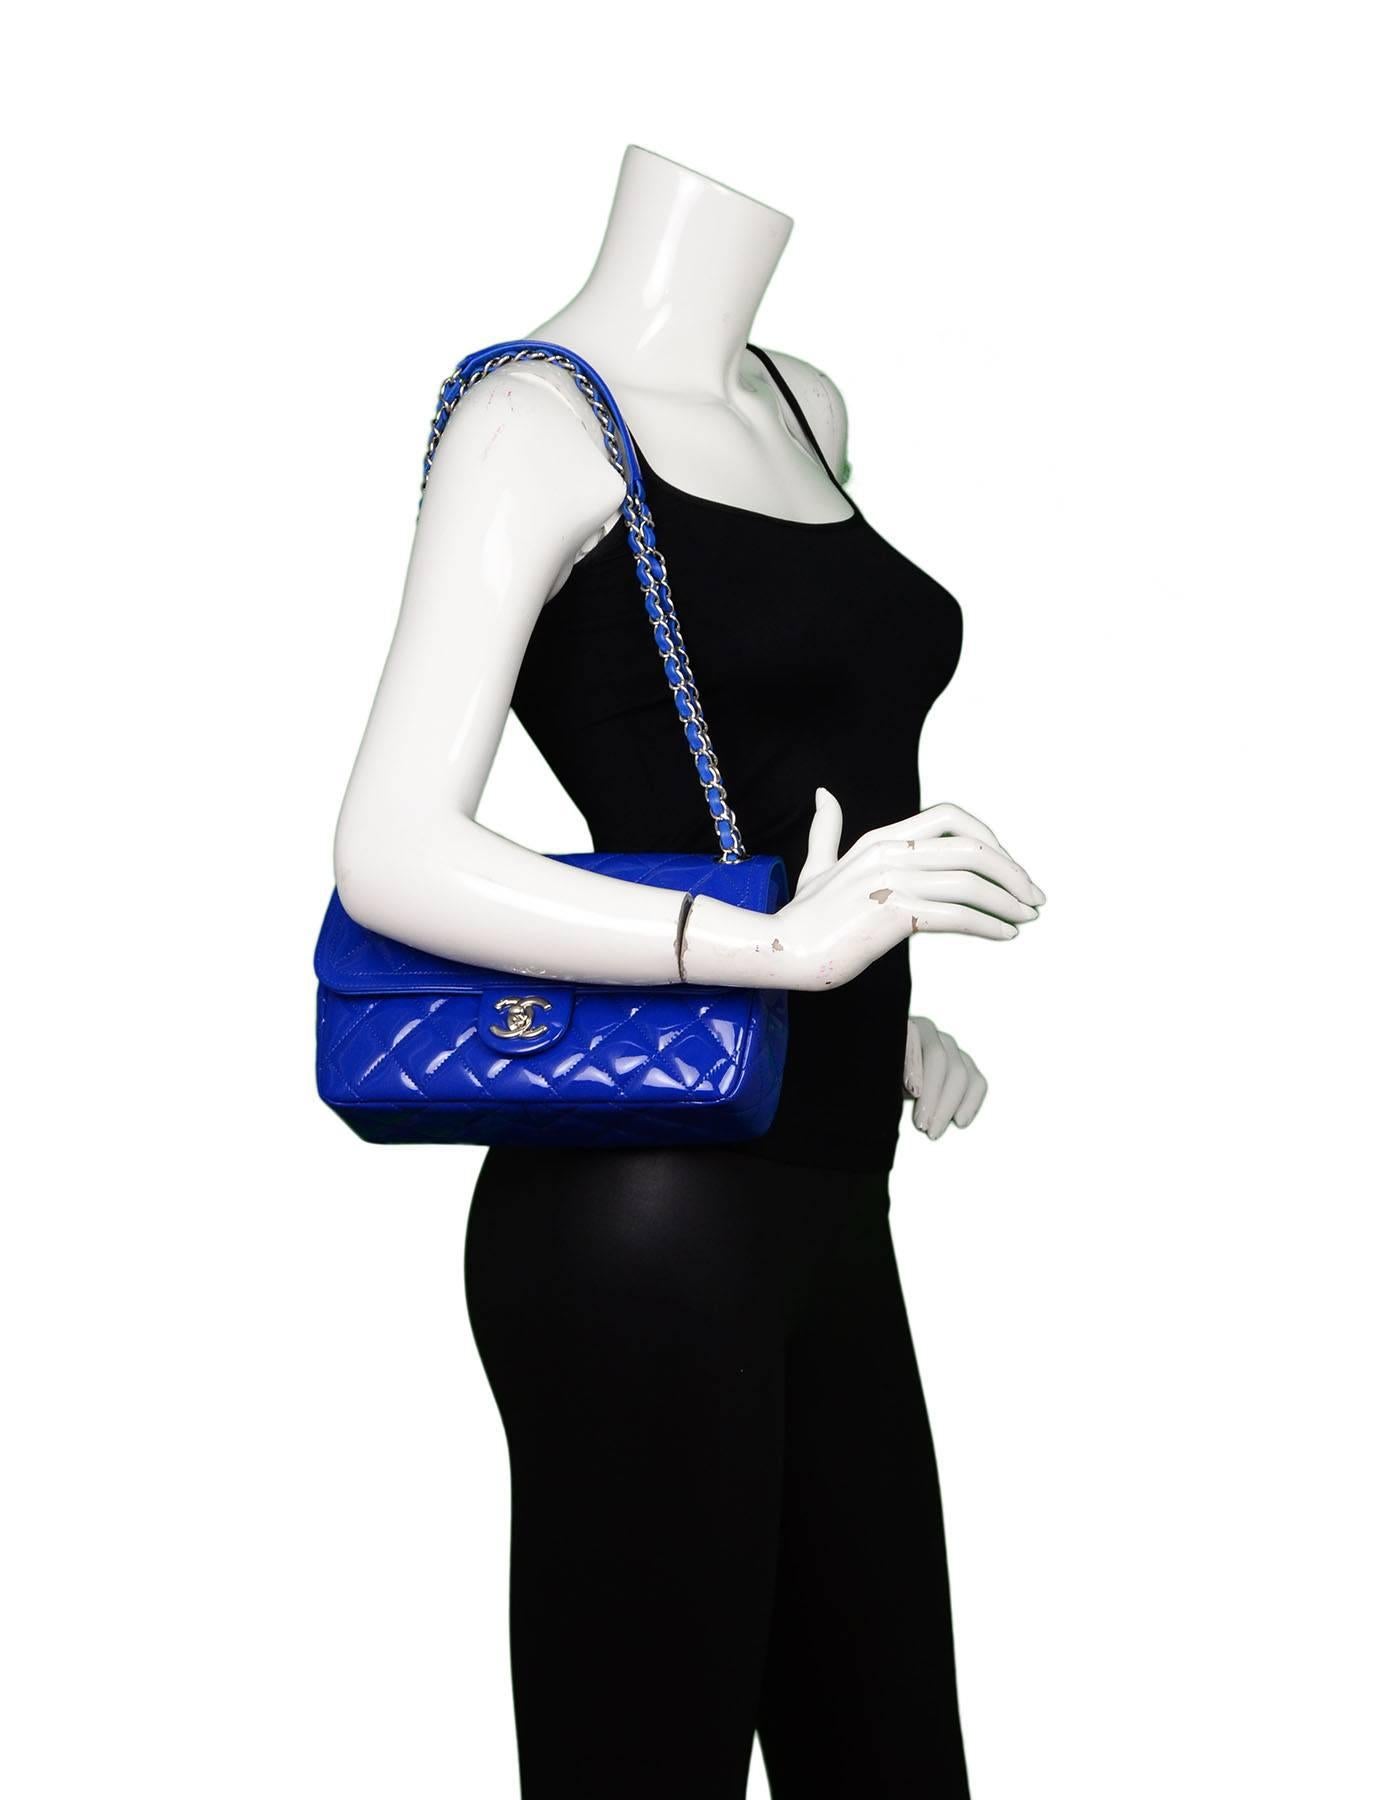 Chanel Blue Patent Leather Flap Bag

Made In: Italy
Year of Production: 2015
Color: Blue
Hardware: Silvertone
Materials: Patent leather, metal, metal
Lining: Black textile
Closure/Opening: Flap top with CC twist lock closure
Exterior